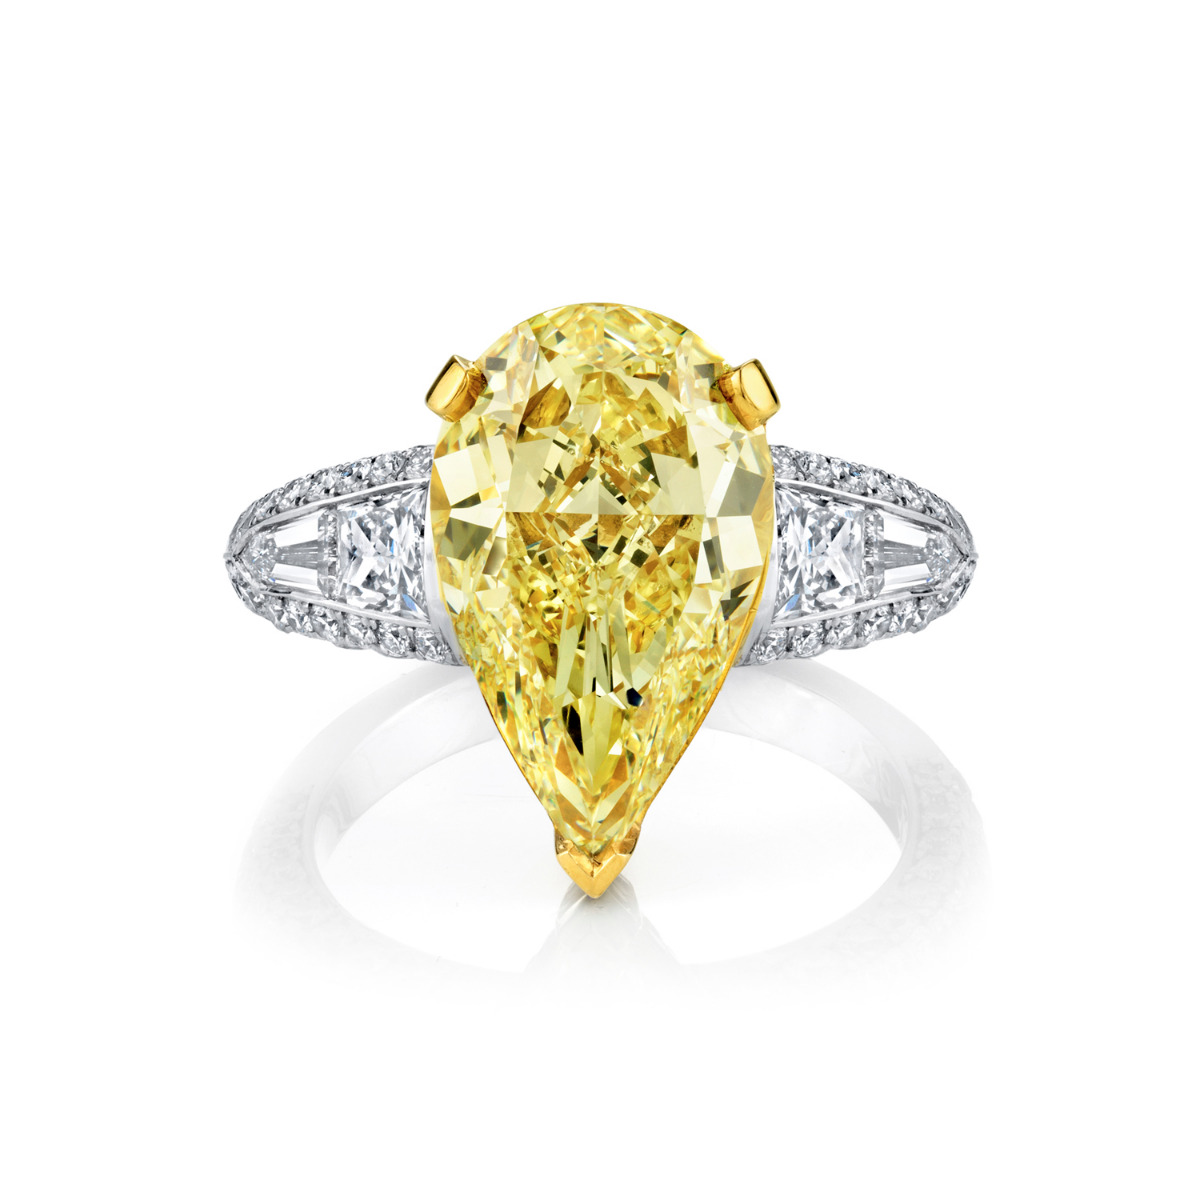 Louis Anthony Jewelers Fancy Yellow Diamond Platinum and 18kt Yellow Gold Ring 